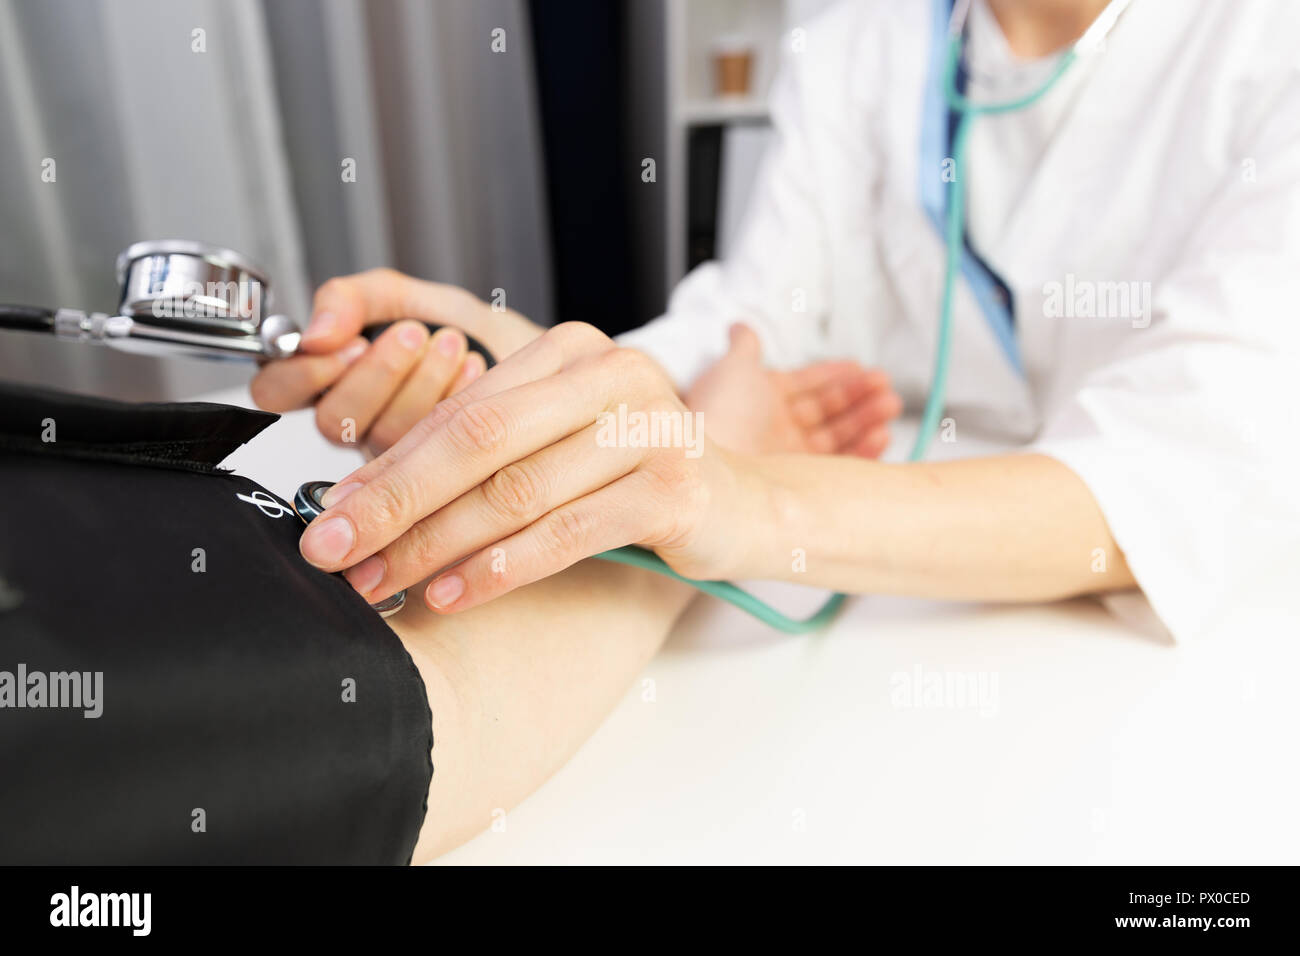 A female doctor measuring blood pressure of a man in a doctors office. Stock Photo